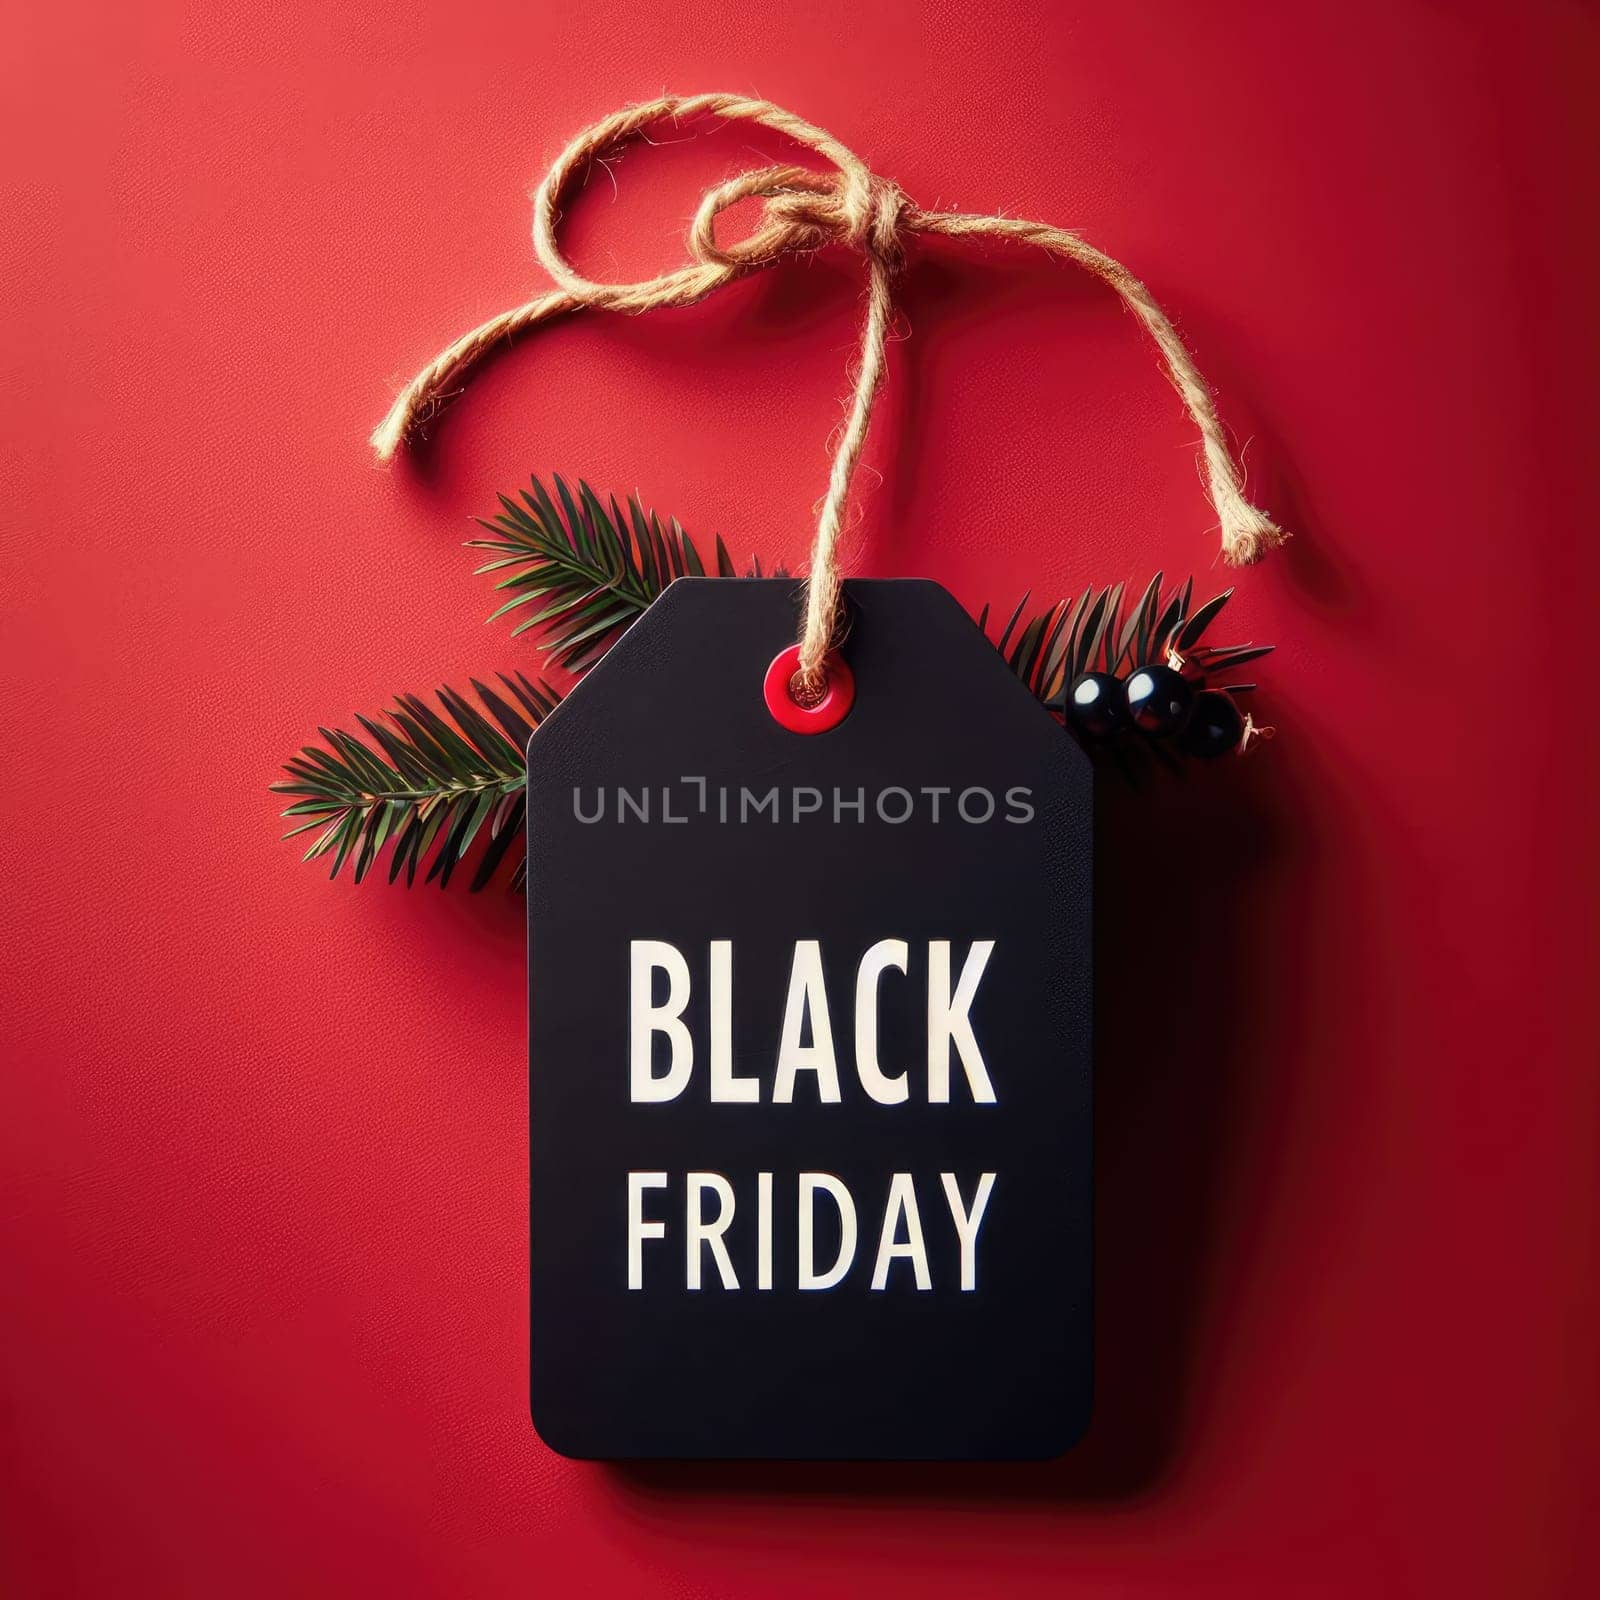 Black friday. Sale tag on the red background.